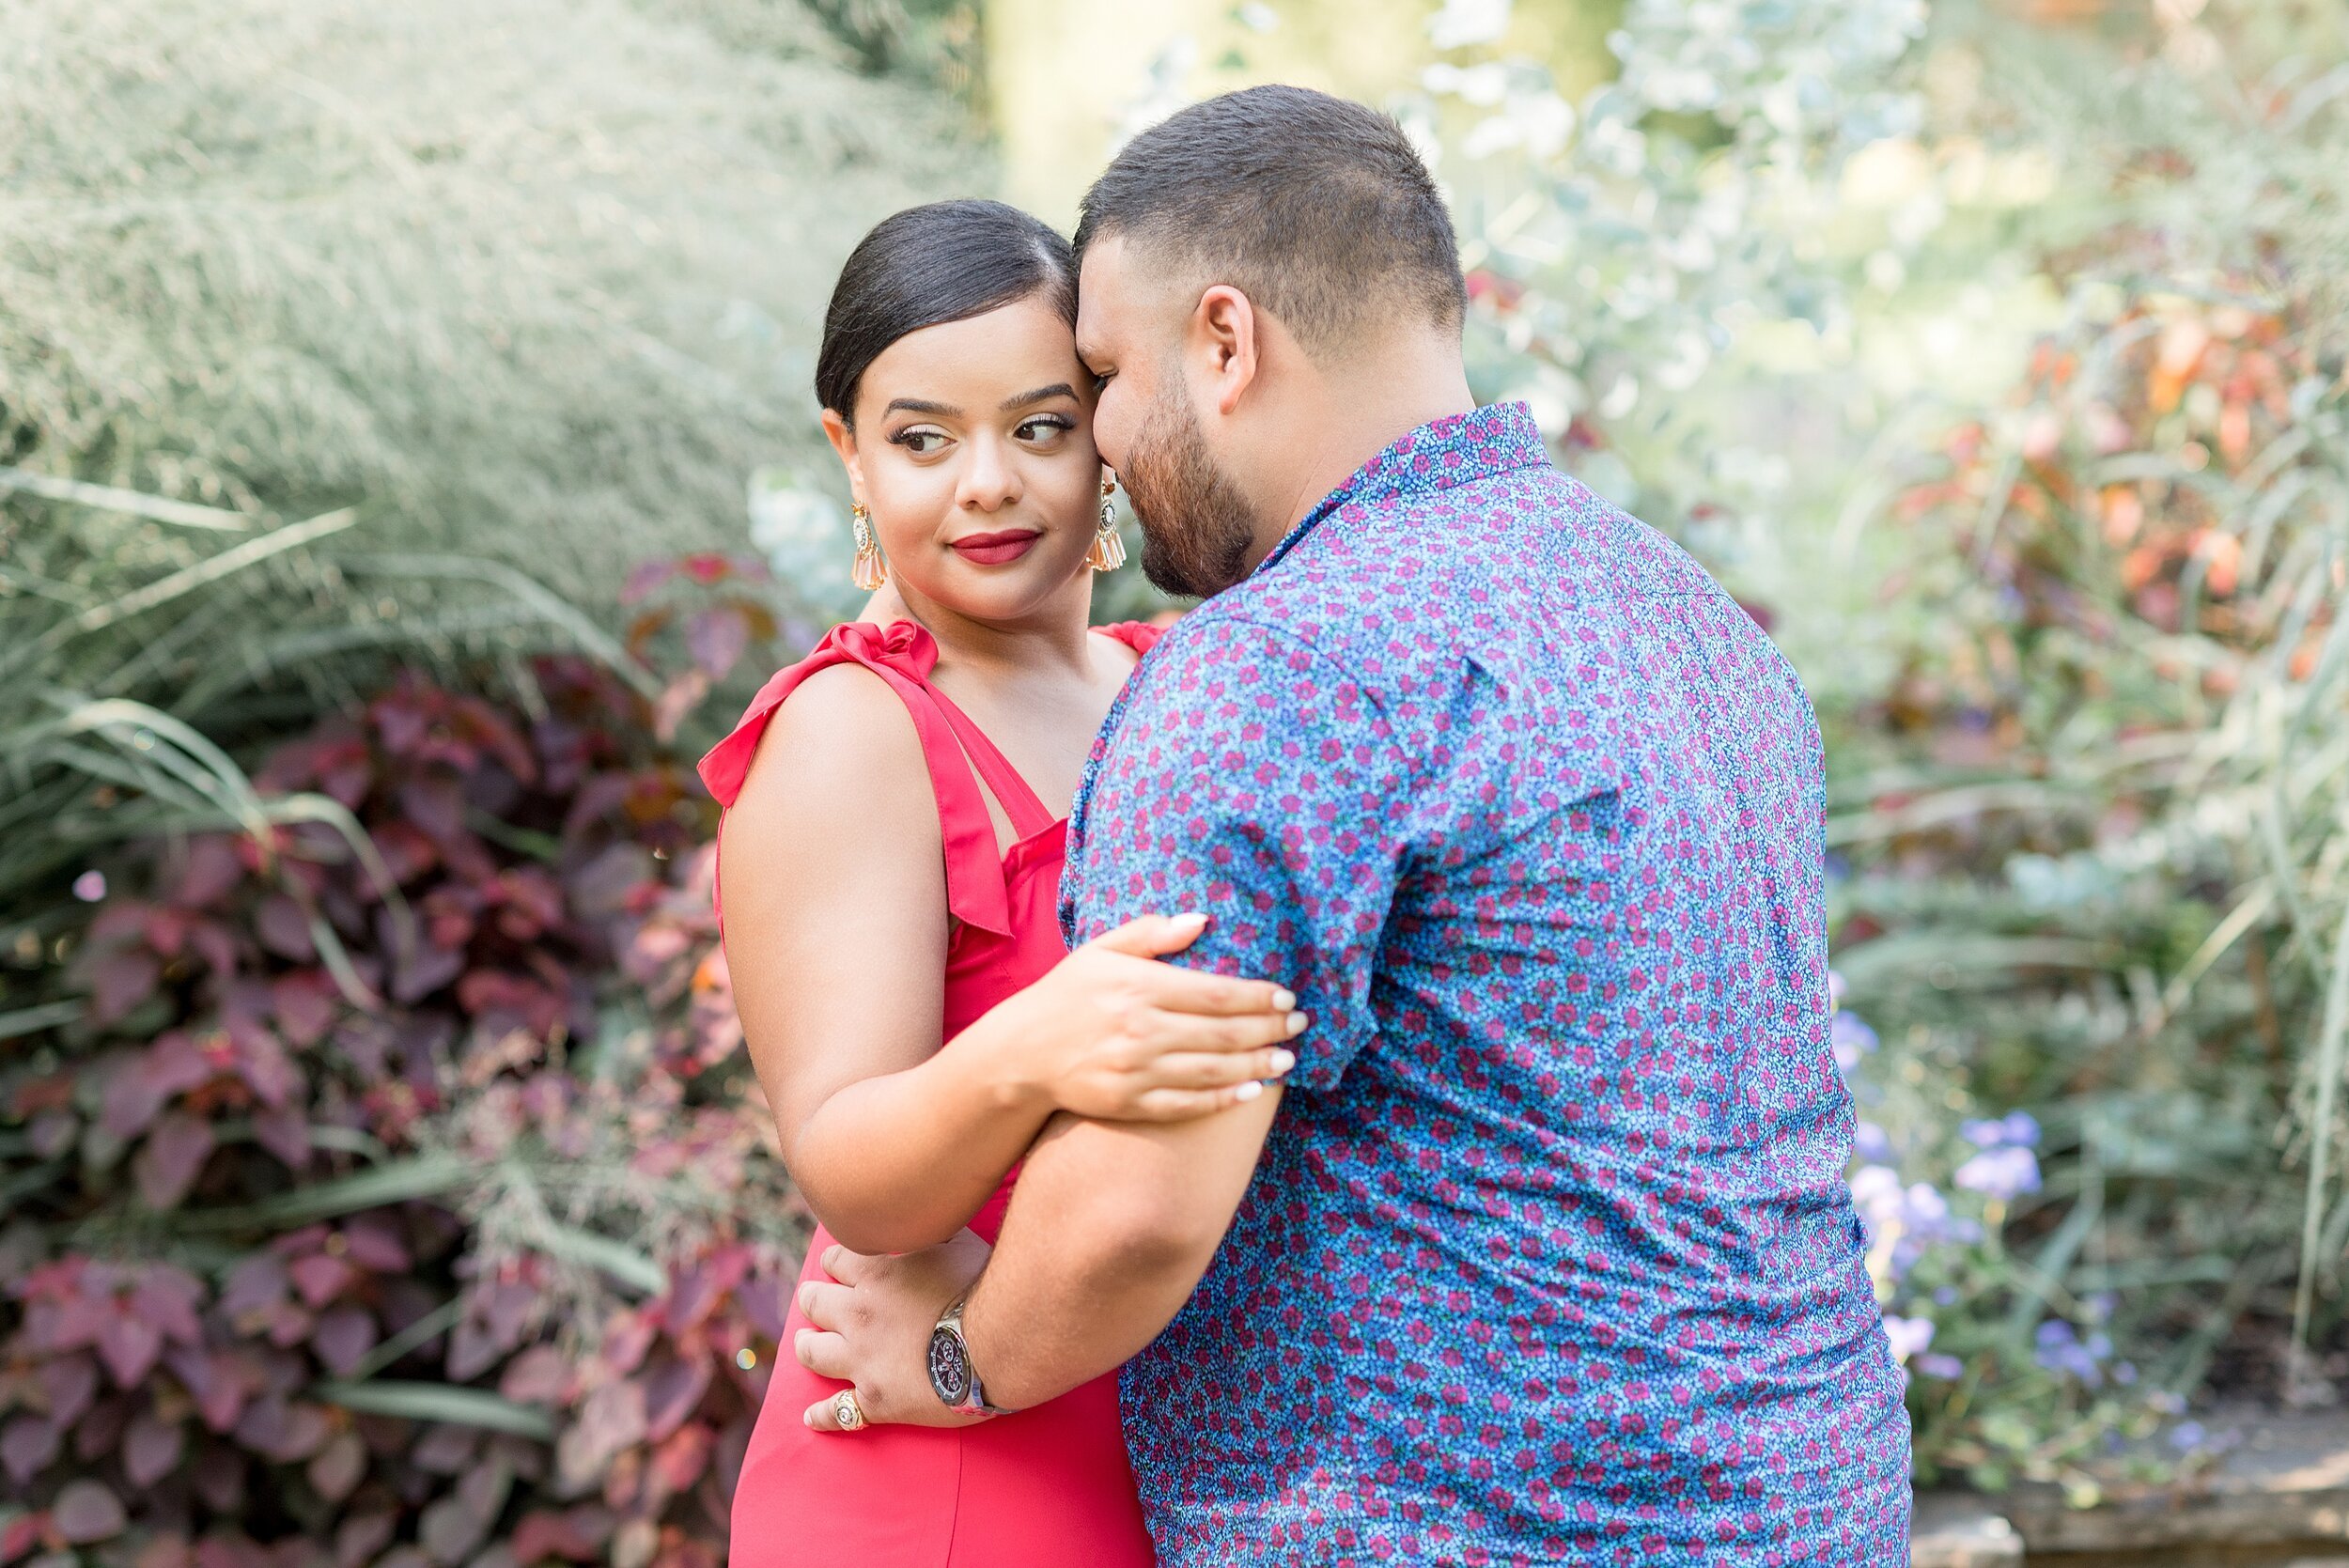 Longwood Gardens Kennet Square Pa Summer Engagement Session Photography_7688.jpg